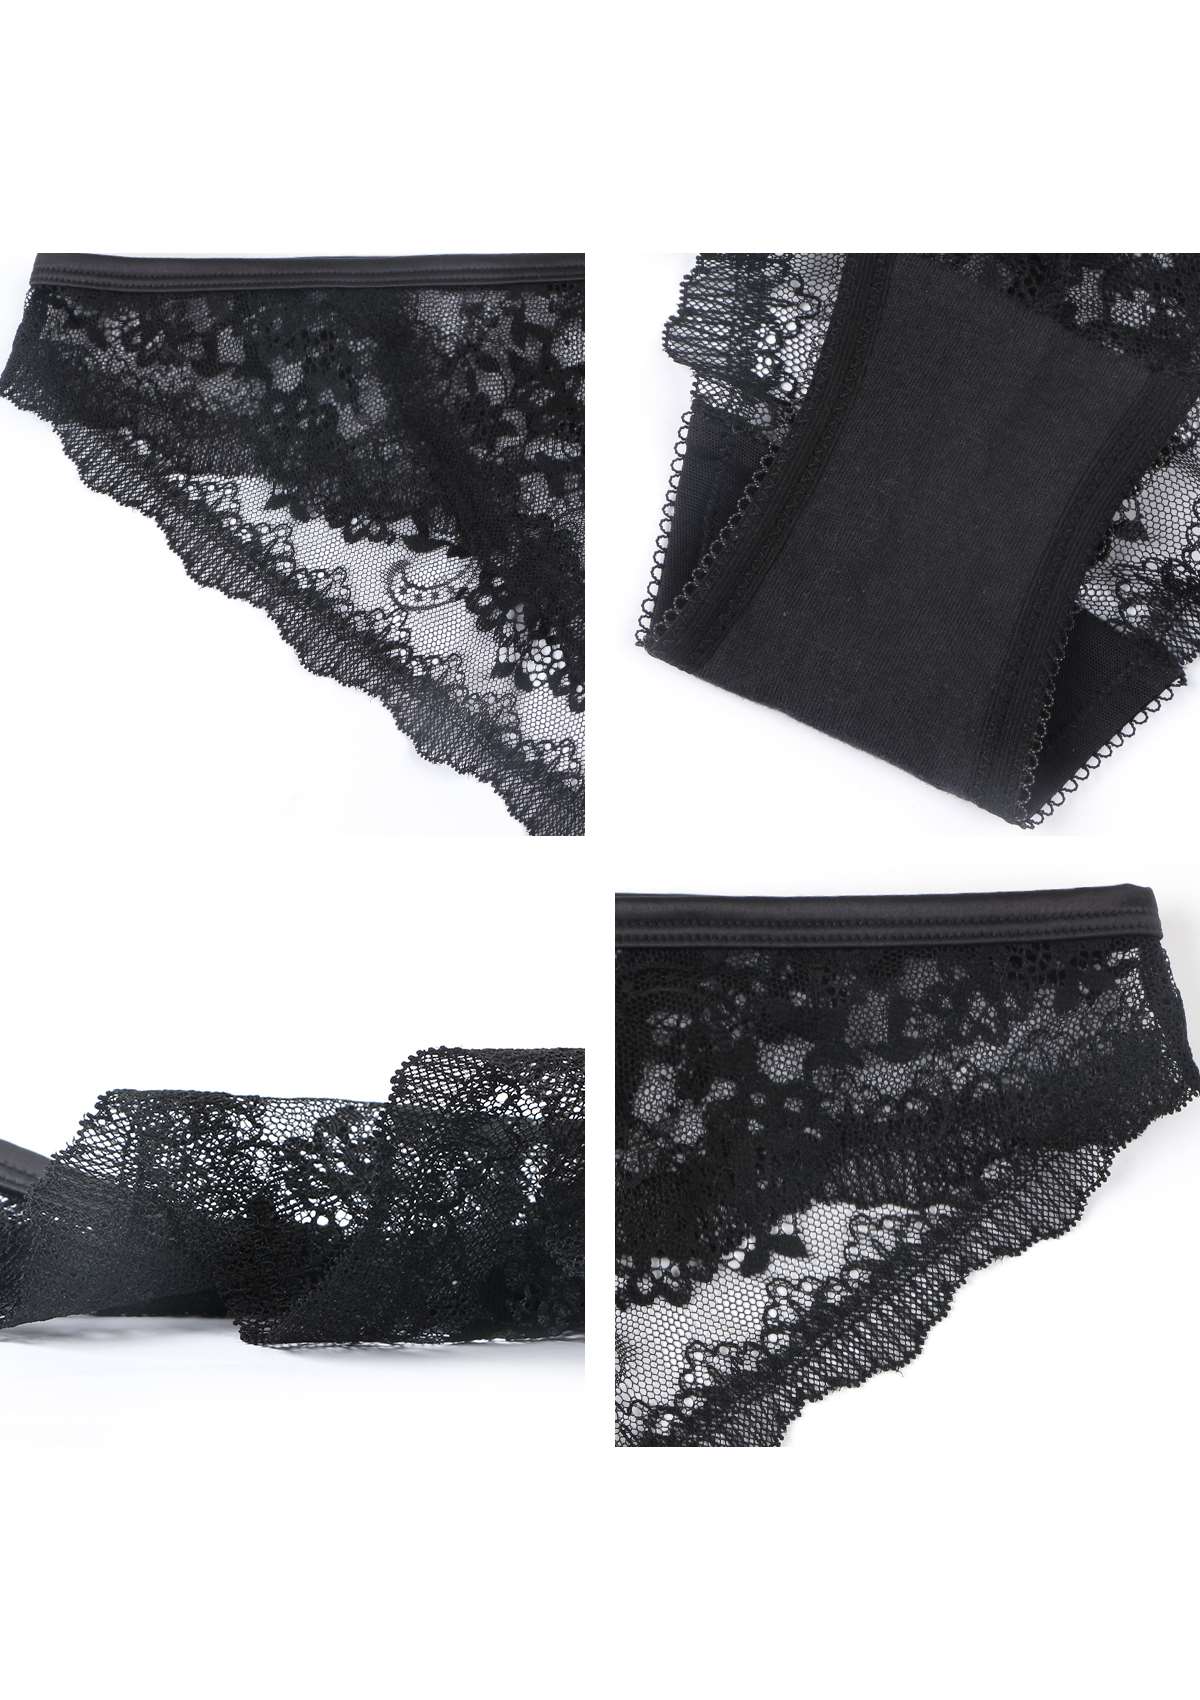 HSIA Floral Lace Bridal Cheeky Underwear: Delicate, Airy, And Comfy - Black / L